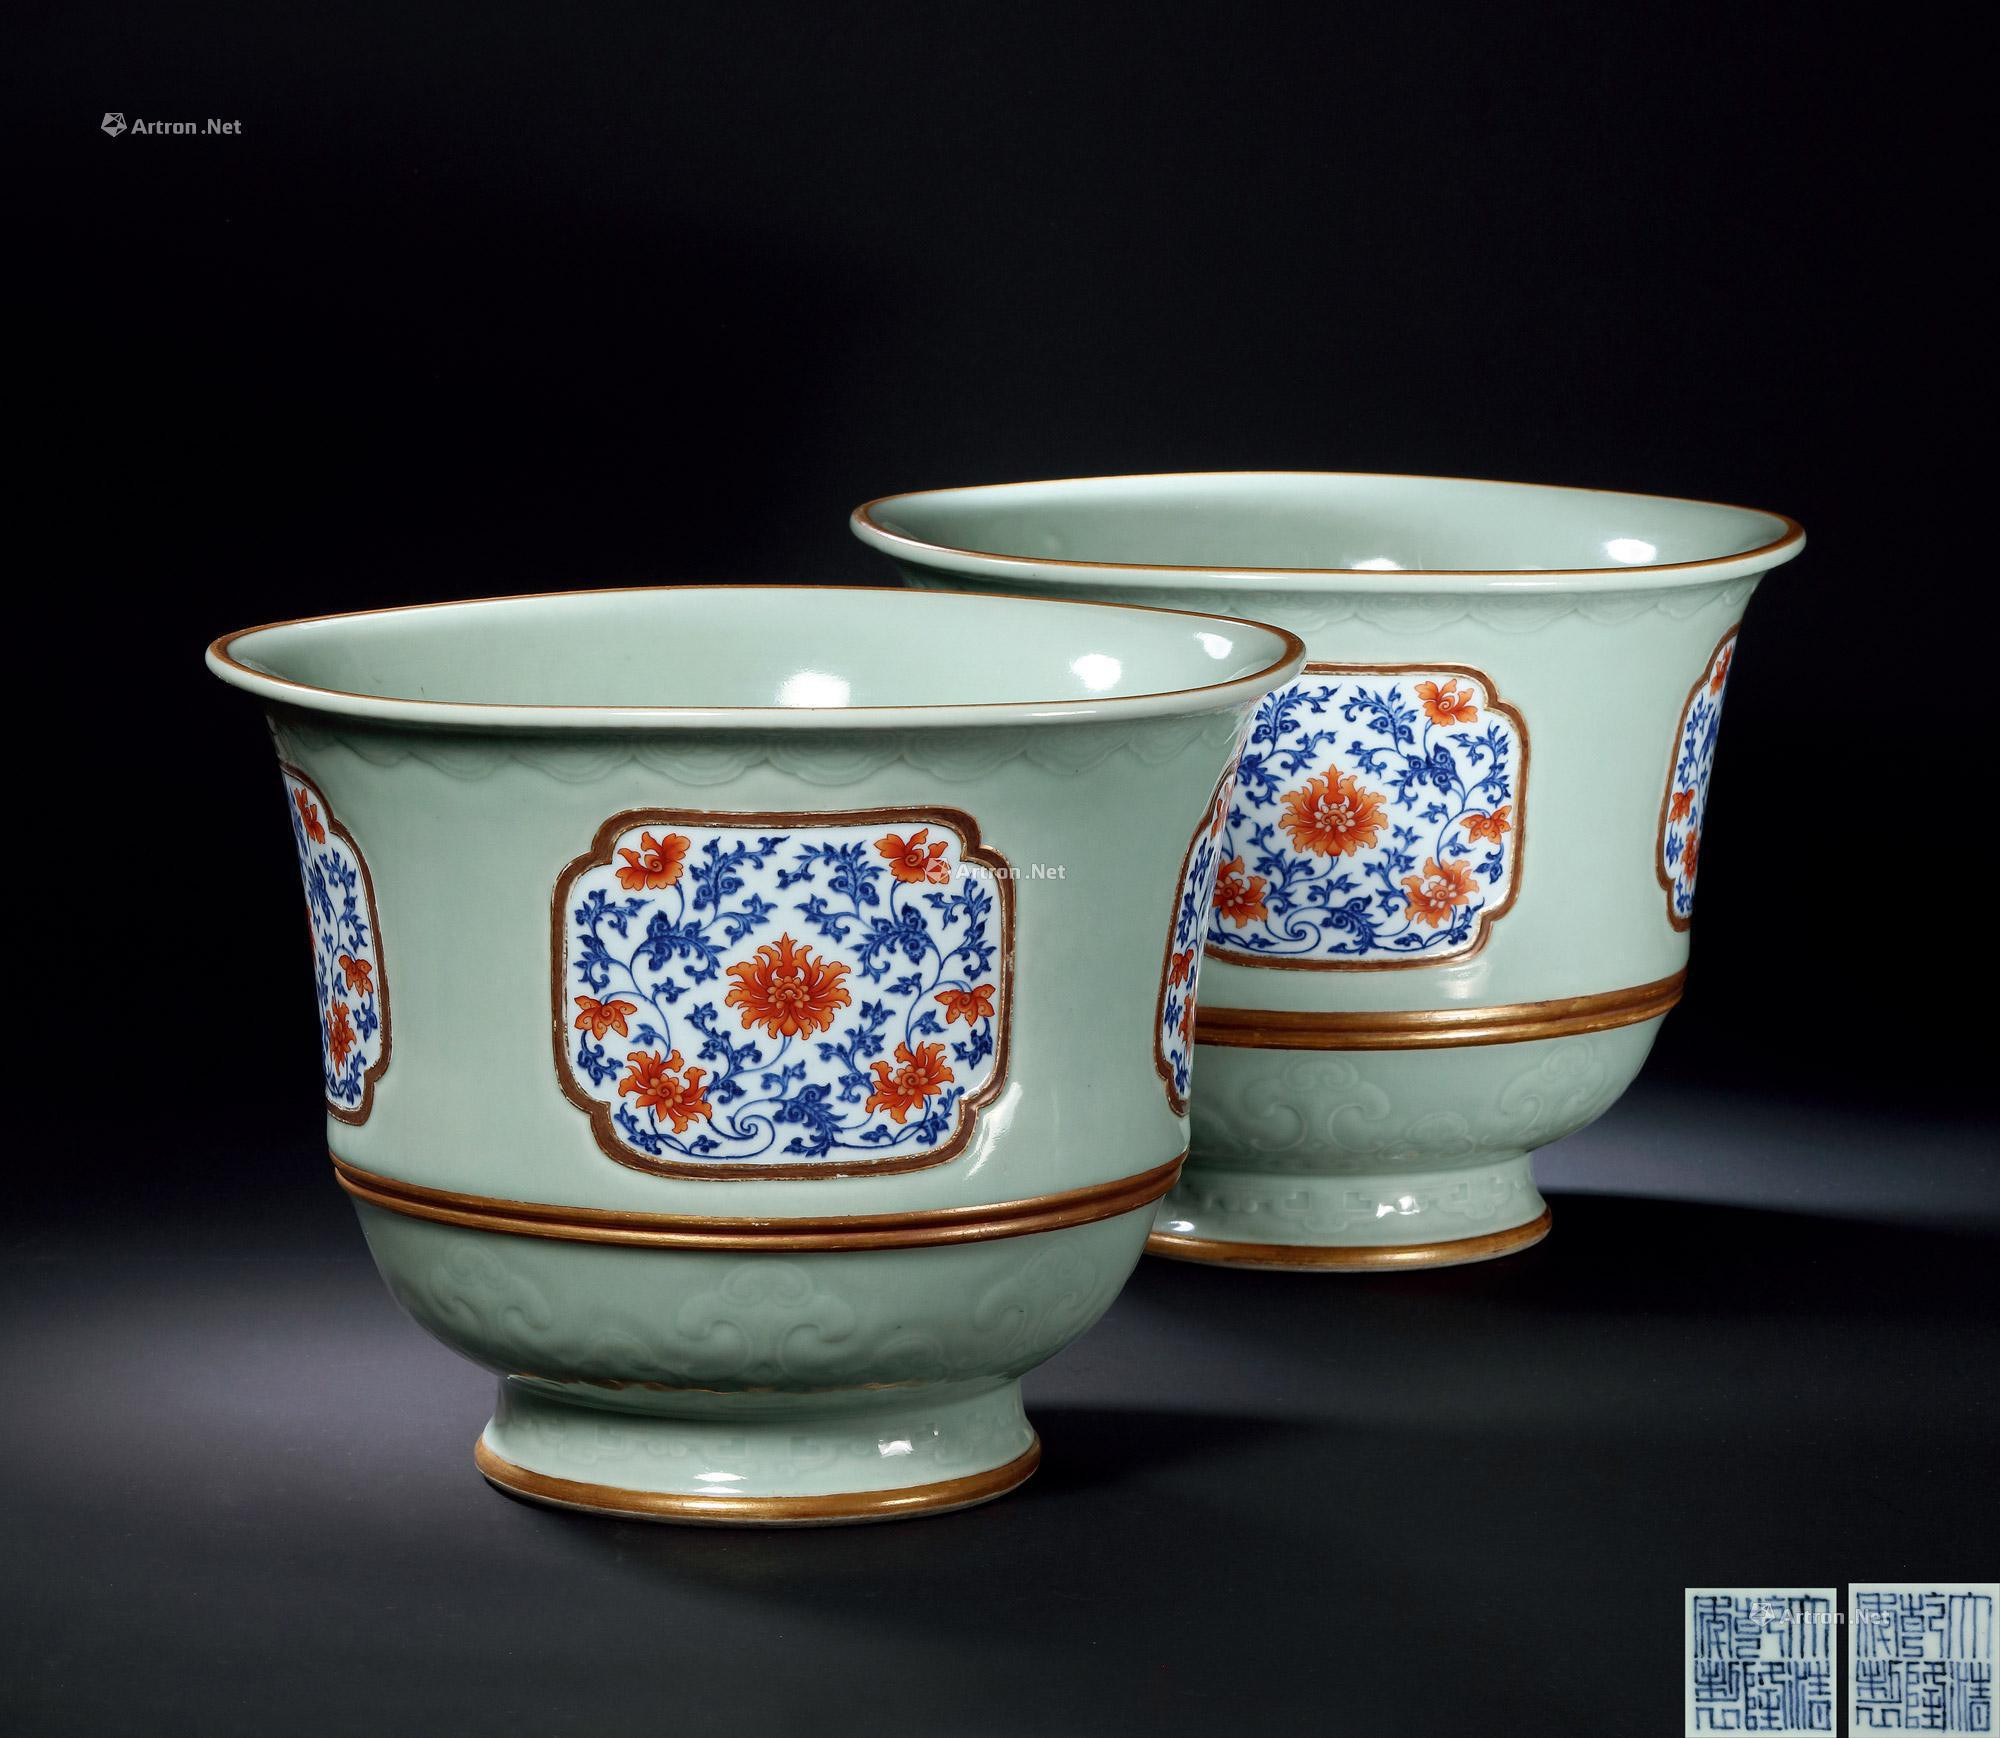 A PAIR OF CELADON-GLAED FLOWER POTS PAINTED WITH BLUE-AND-WHITE， RED COPPER AND GOLD-PAINTED PATTERNS